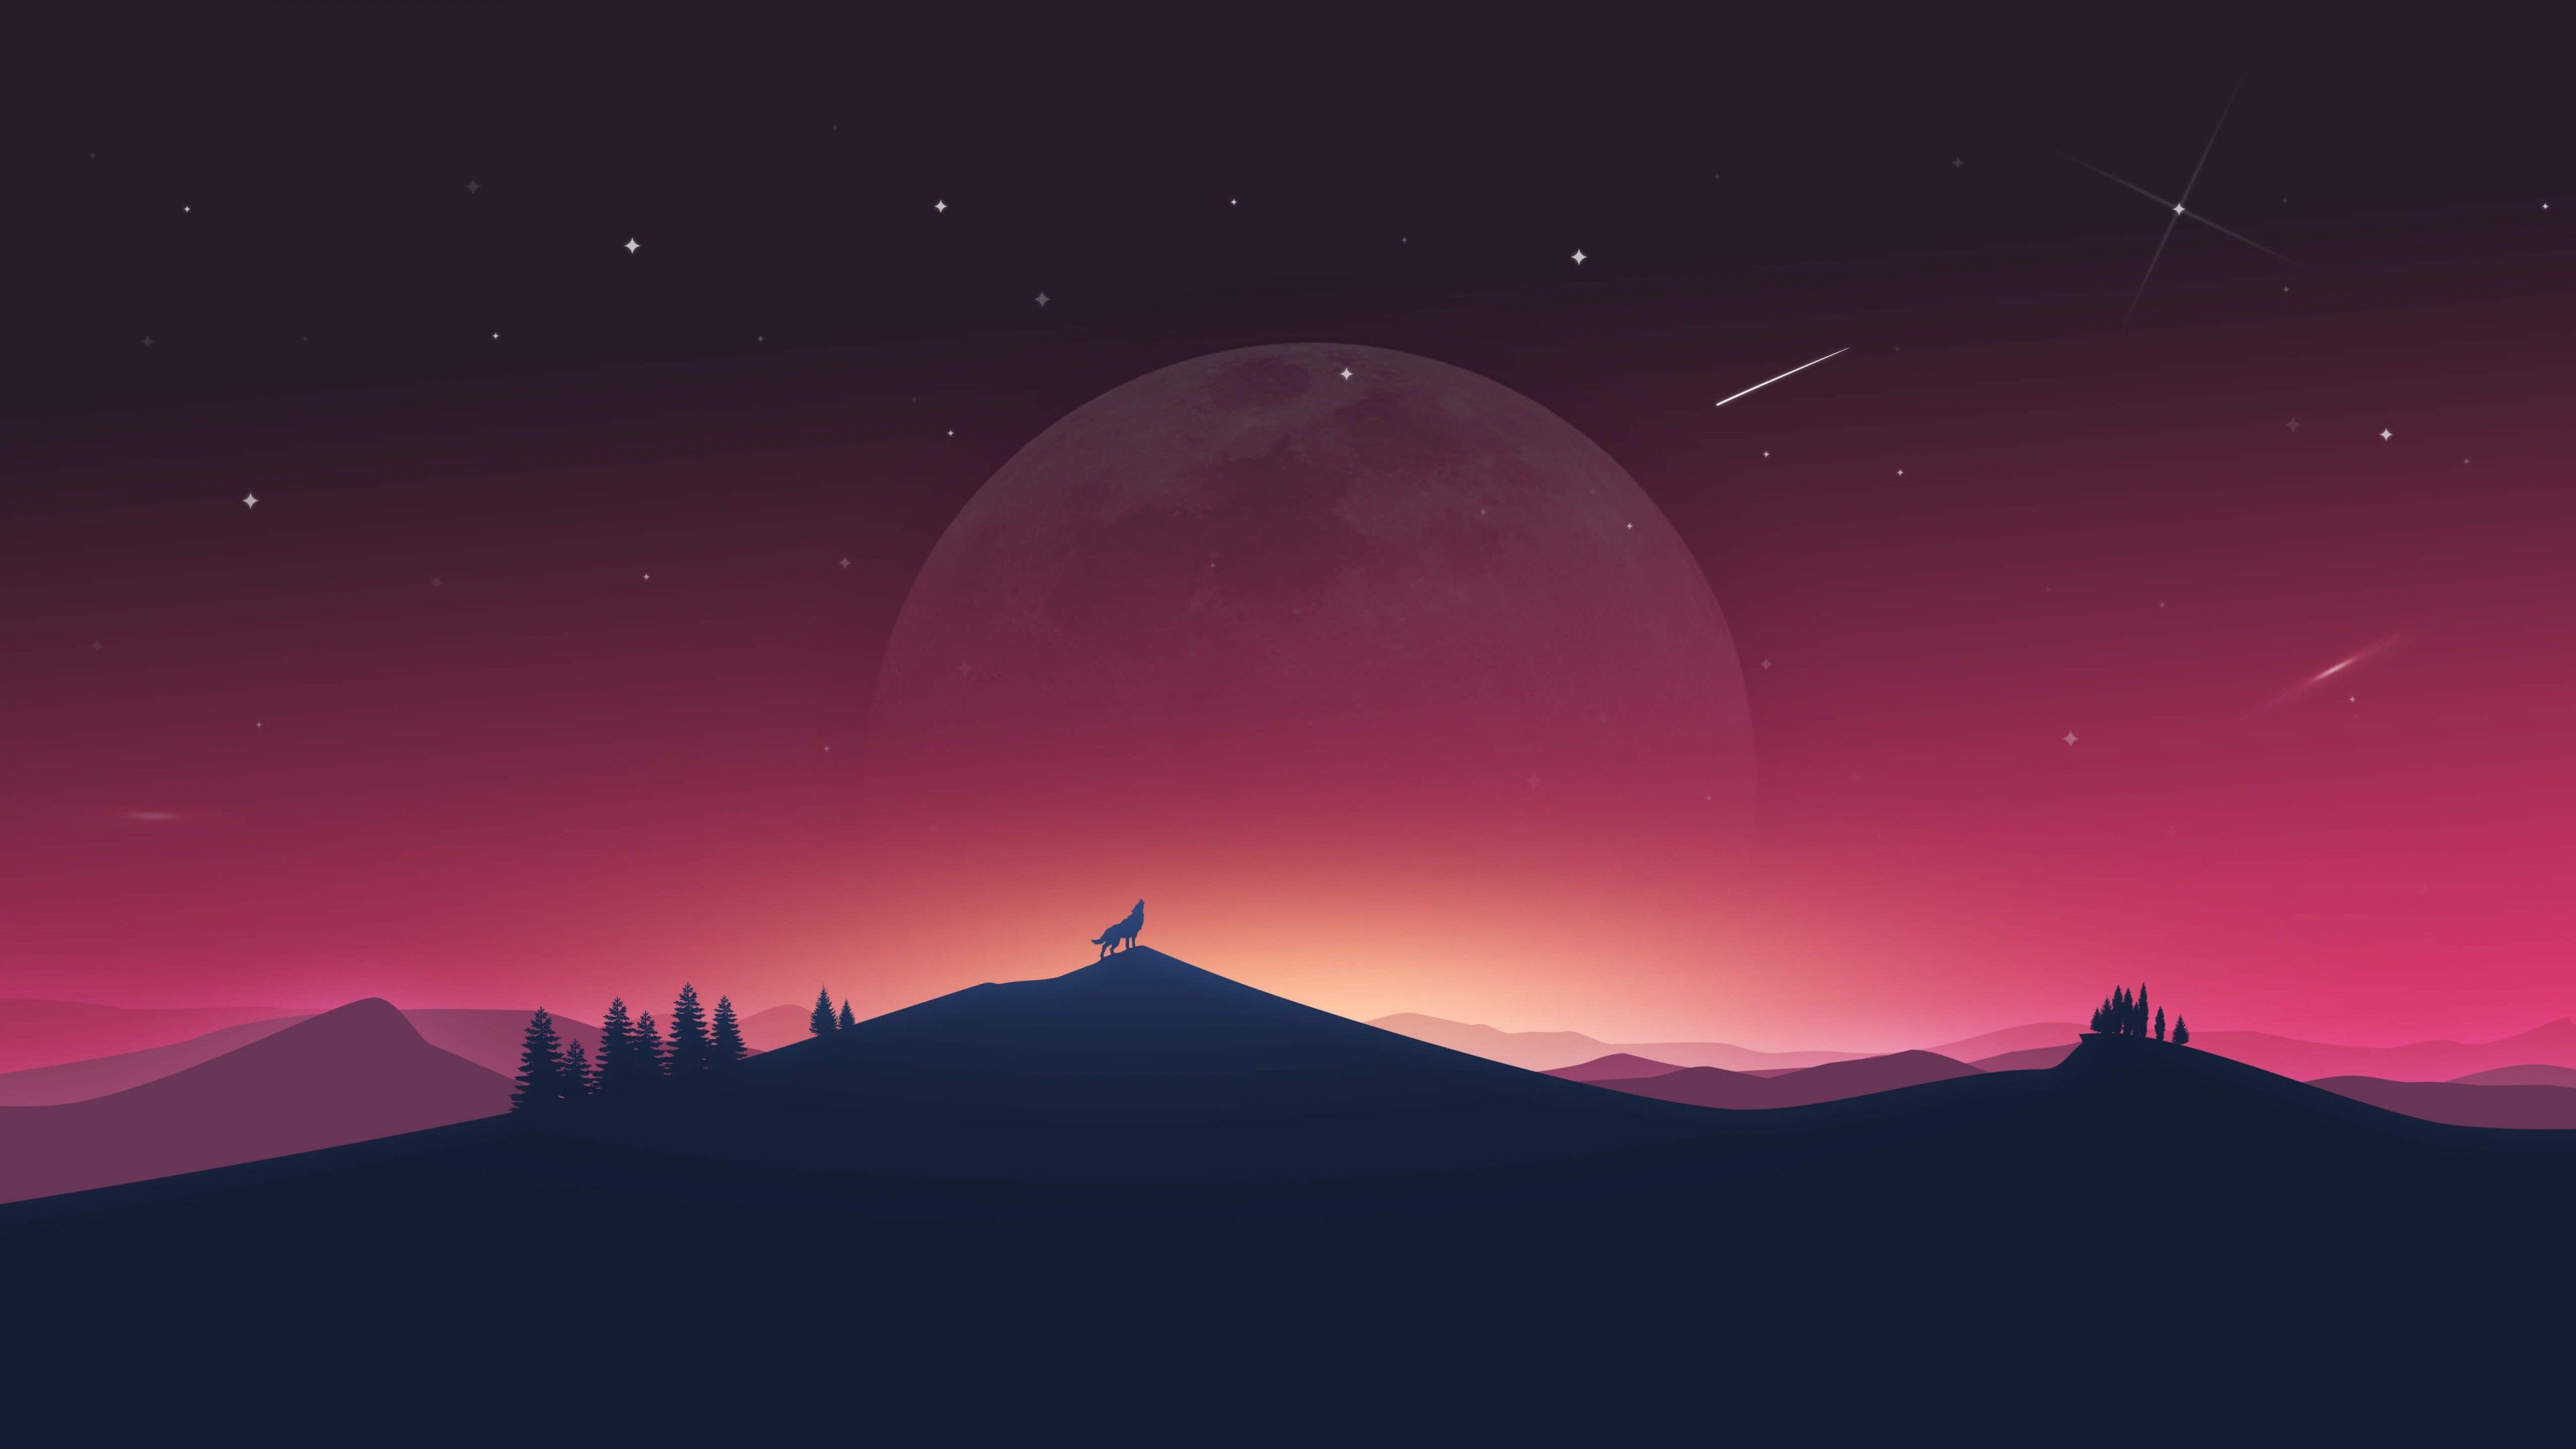 Aesthetic Moon PC Wallpapers - Wallpaper Cave